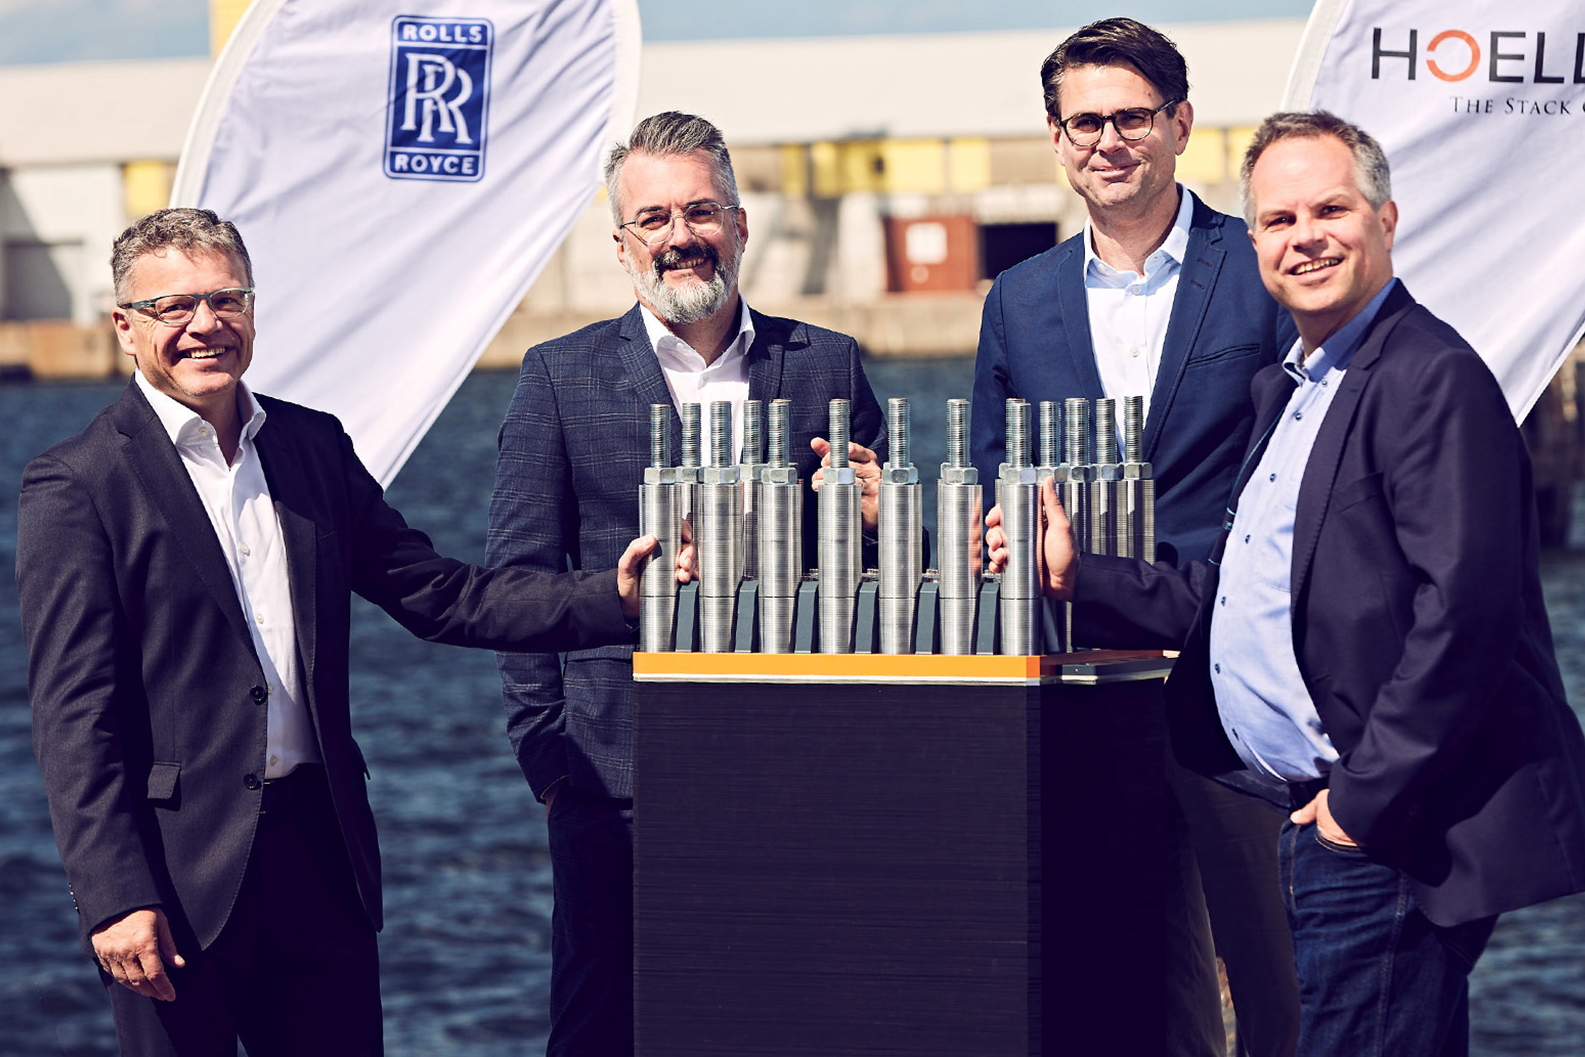 From left: Dr. Otto Preiss, COO of Rolls-Royce's Power Systems Division; Armin Fürderer - Power Systems' Head of Net Zero Solutions Business Unit; Stefan Höller - Founder and Head of Development of Hoeller; and Matthias Kramer, Joint Head - Hoeller Electrolyzer. Click to enlarge.